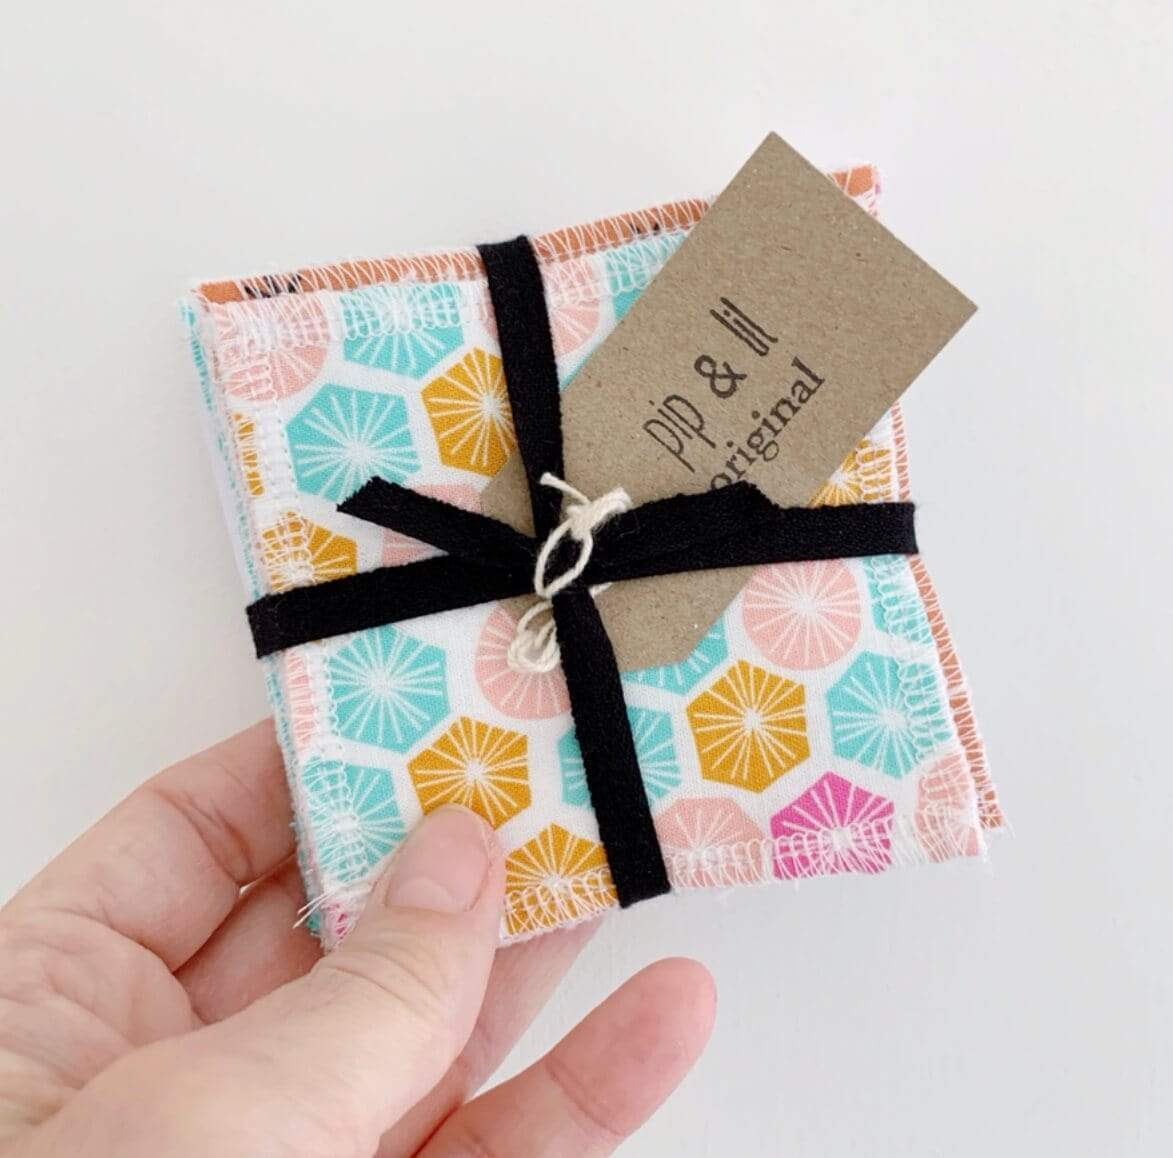 Pip & Lil Face Wipes Reusable Face Wipes - Geometric Patterns